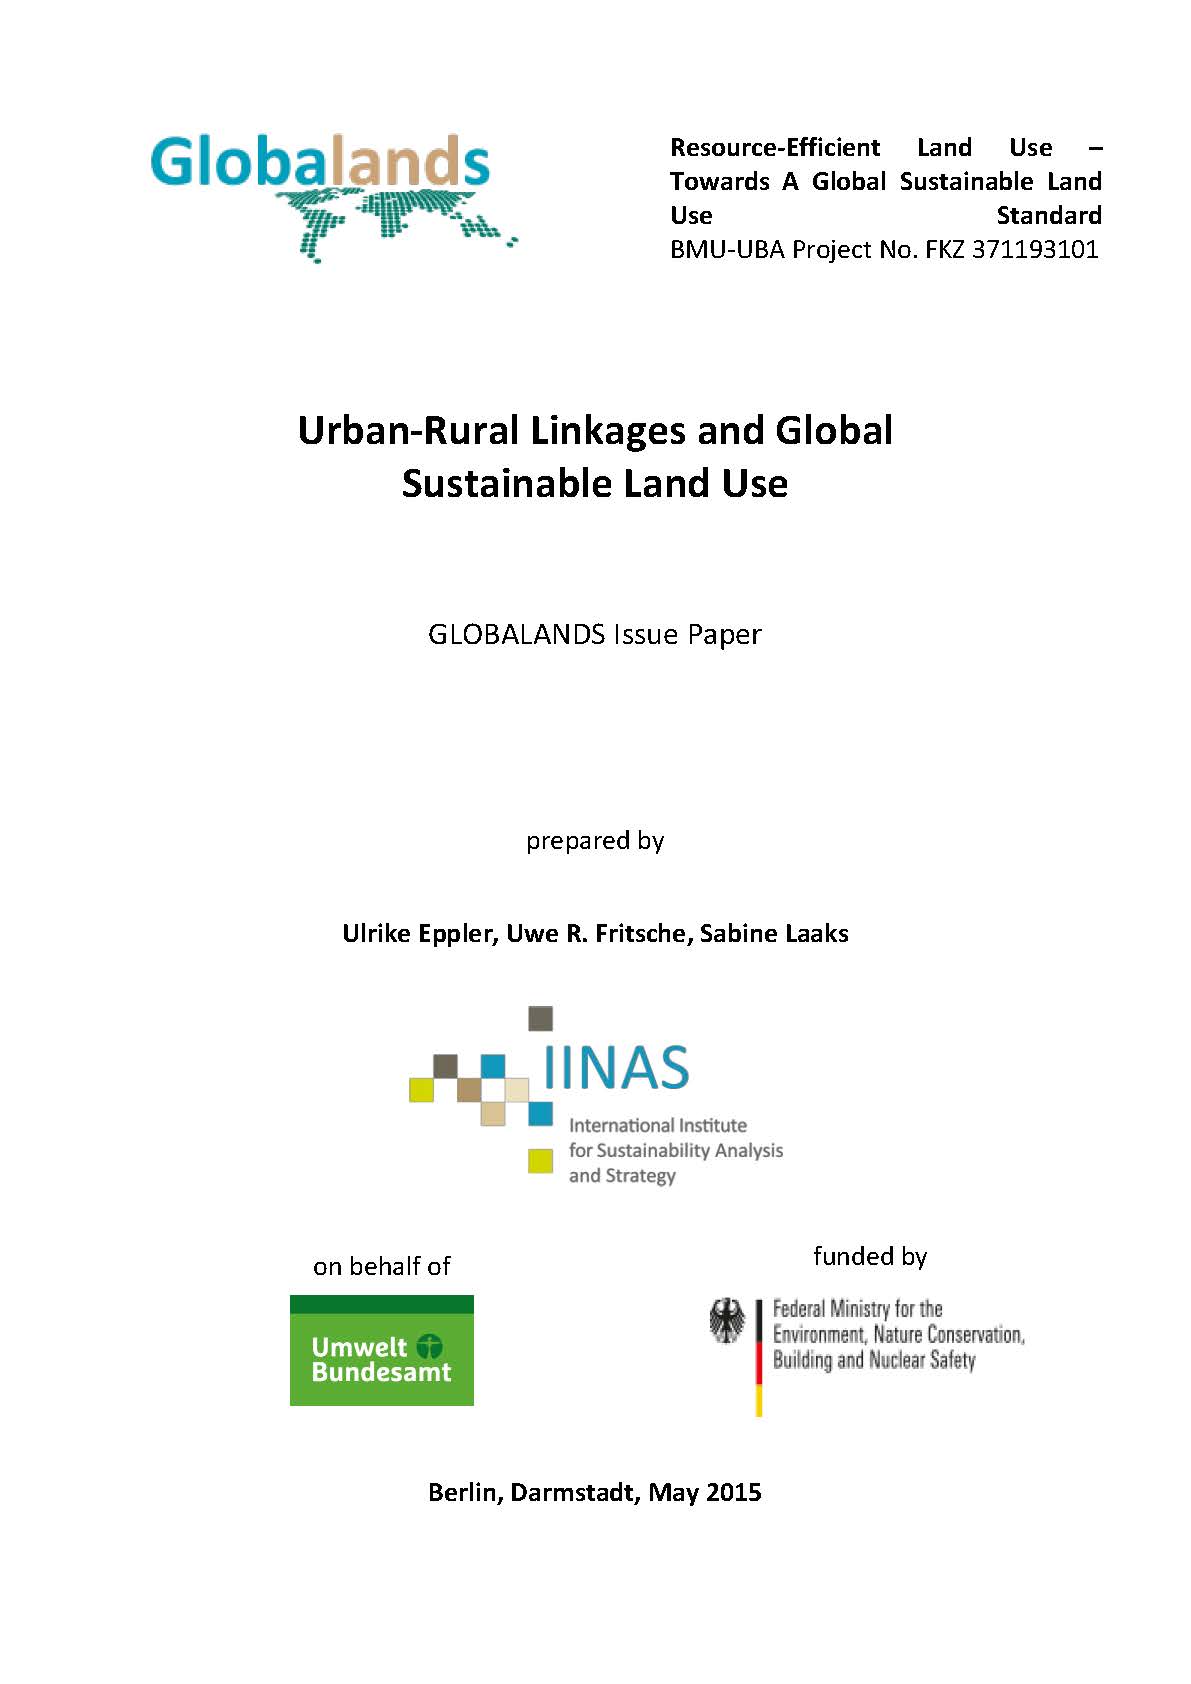 Titelseite GLOBALANDS Urban-Rural Linkages and Global Sustainable Land Use